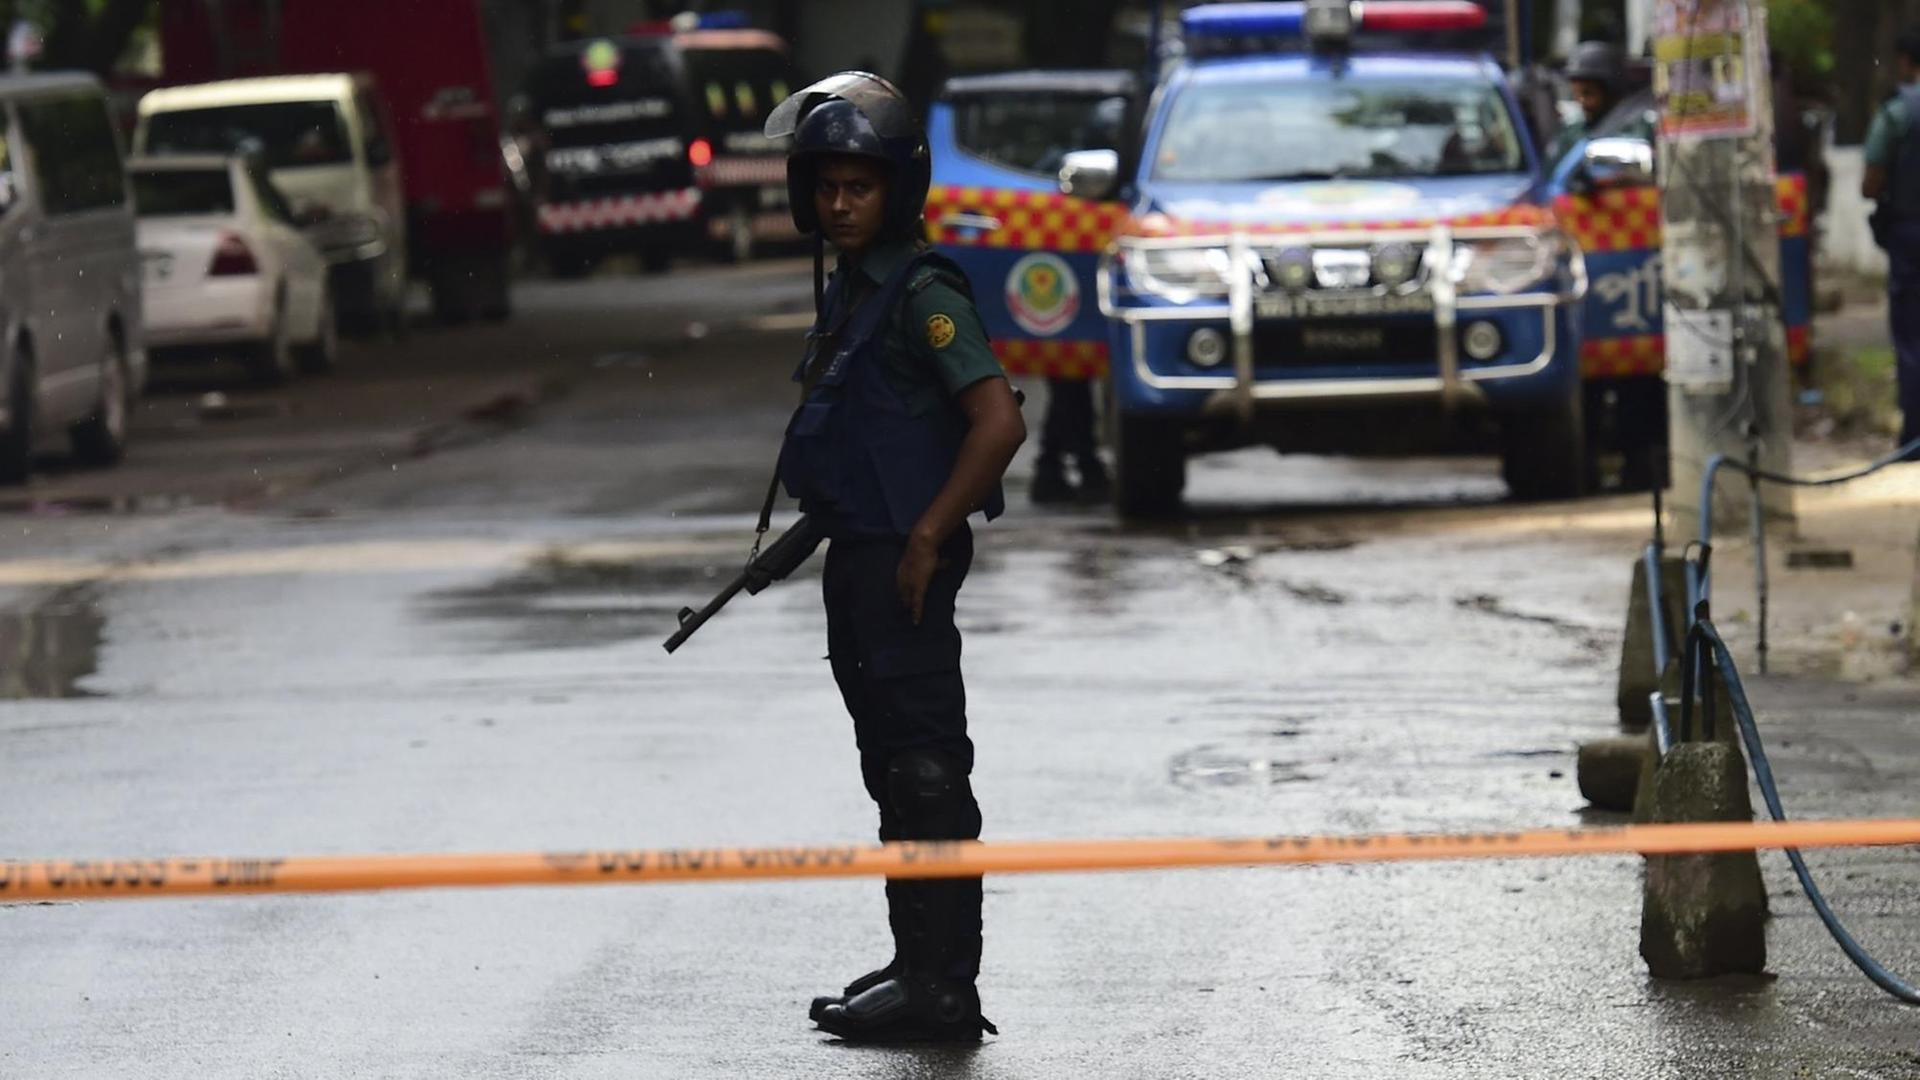 A Bangladeshi security personal stands guard during a rescue operation as gunmen take position in a restaurant in the Dhakas high-security diplomatic district on July 2, 2016 where several people including foreigners are believed to be trapped. Thirteen hostages have been rescued after security forces ended a siege at a cafe in the Bangladeshi capital Dhaka, a top commander said. / AFP PHOTO / APF / STR